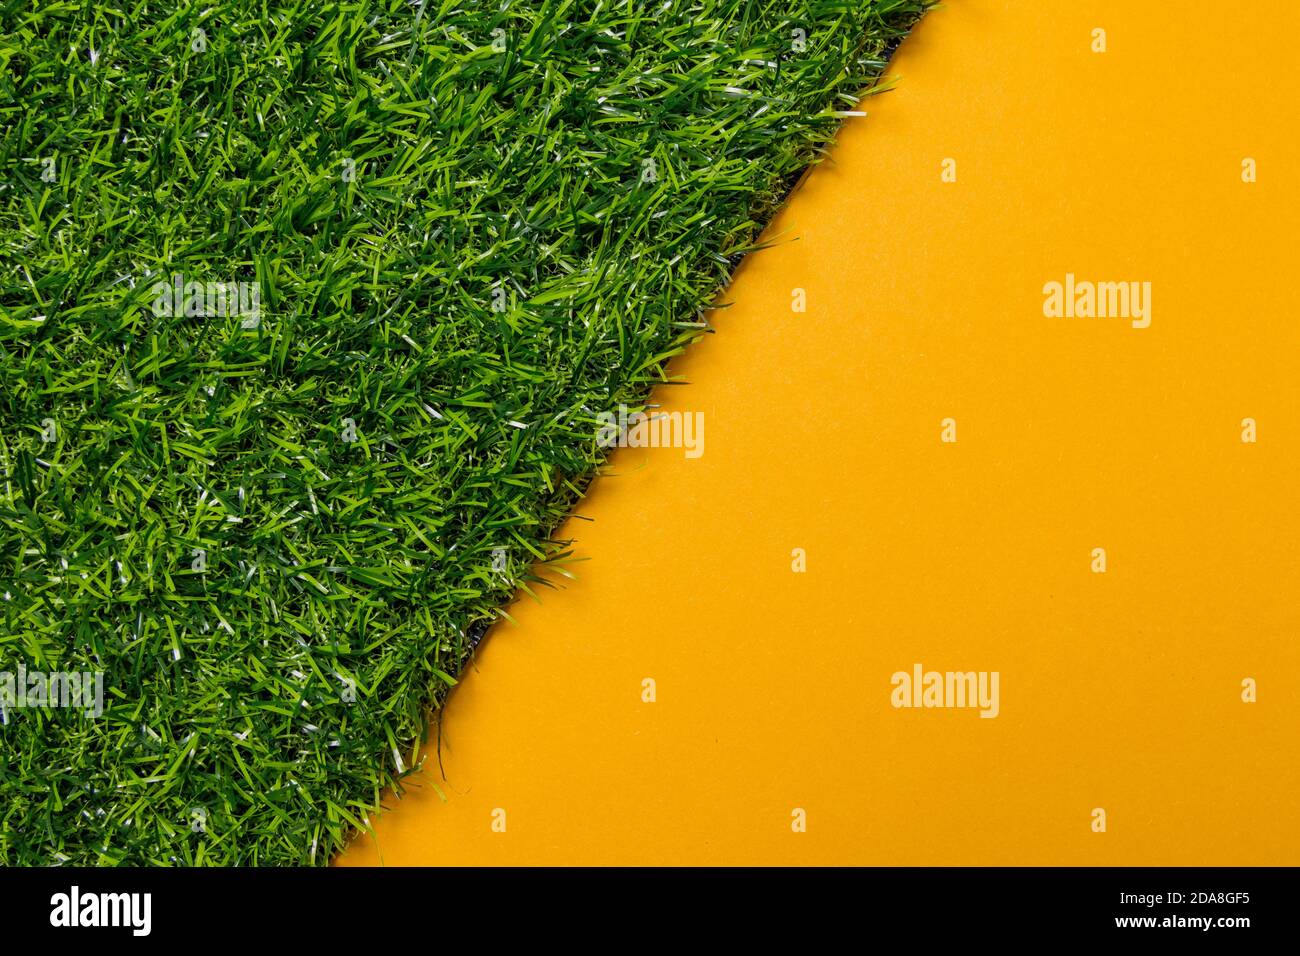 Top view of artificial grass on a yellow uniform background, the image is cut diagonal by the plastic gras, use as template or background Stock Photo